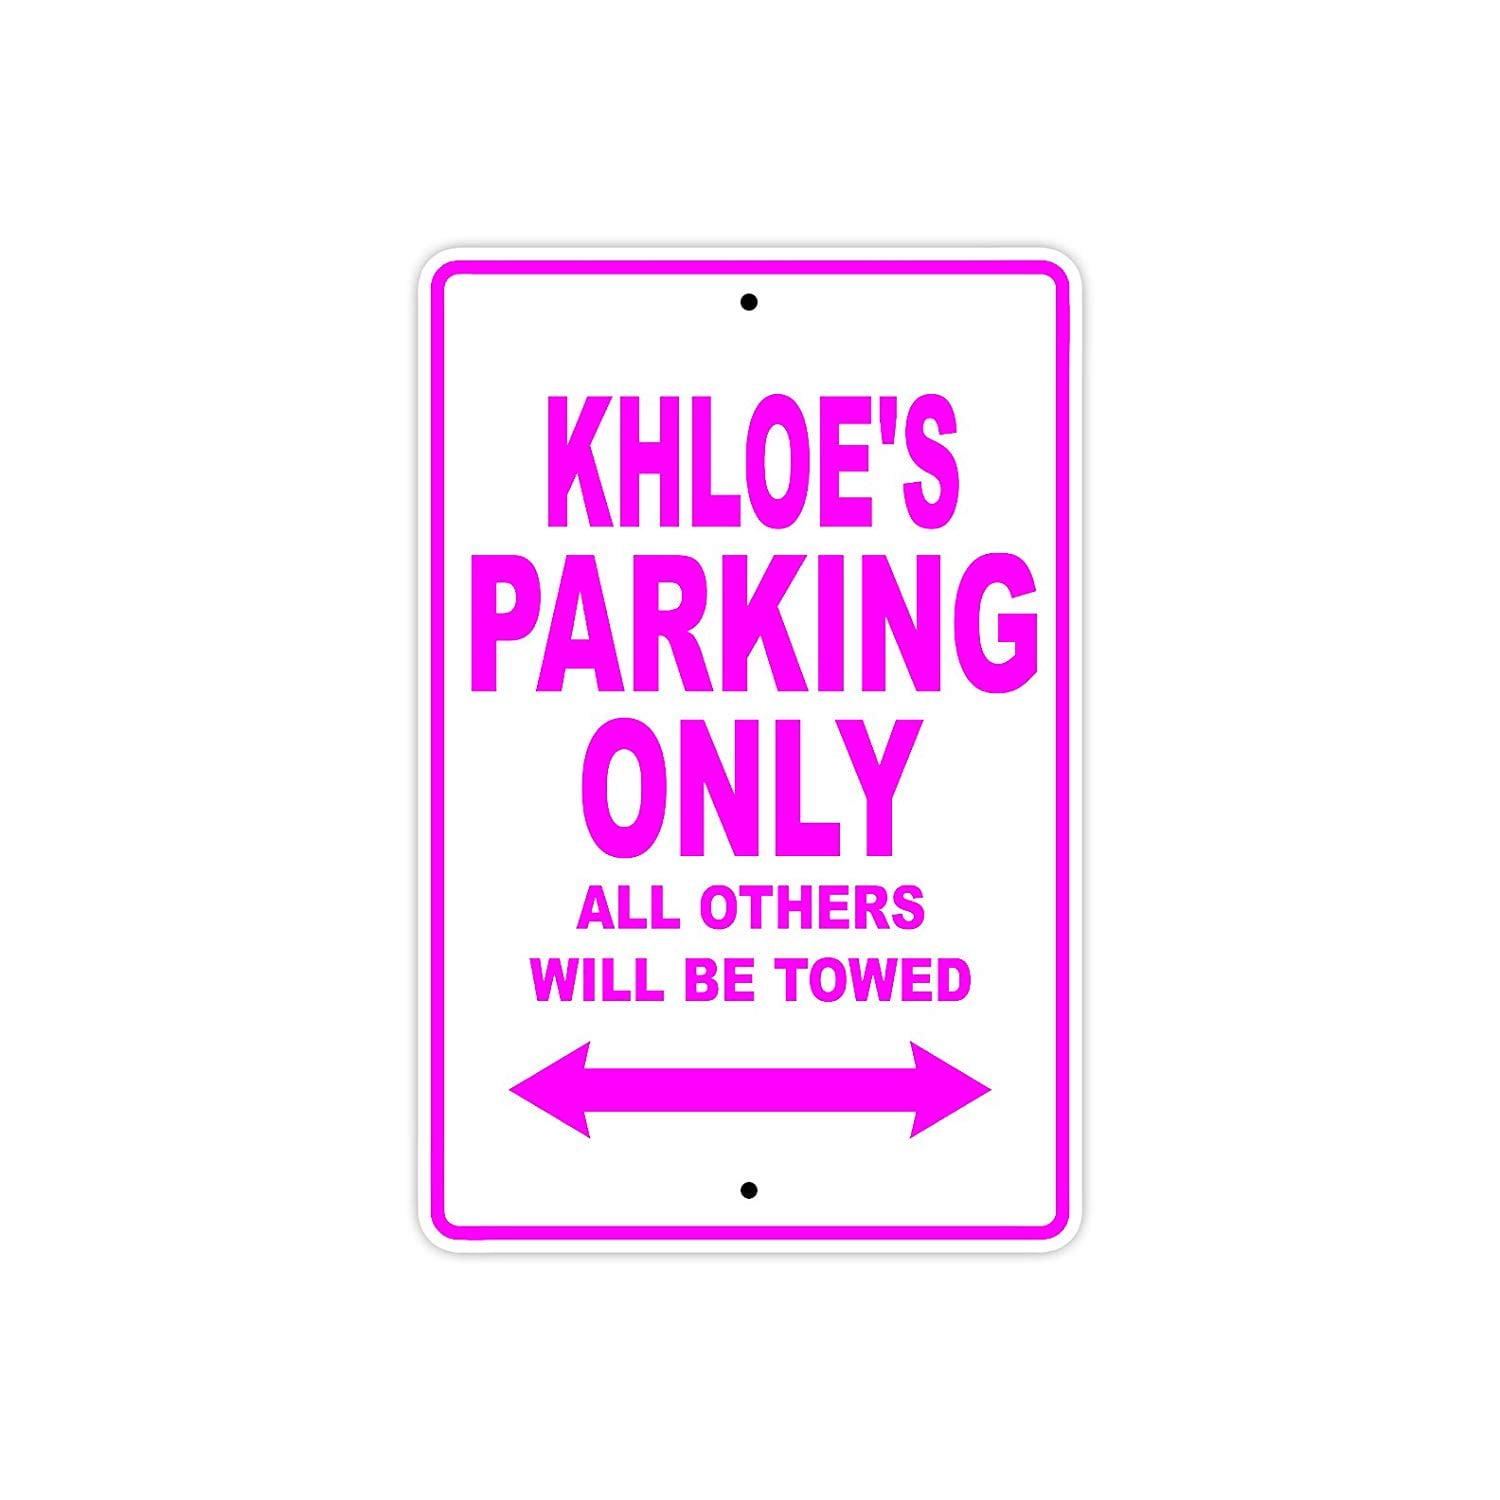 8" x 12" MOTORCYCLE PARKING ONLY ALL OTHERS WILL BE TOWED METAL EMBOSSED SIGN 